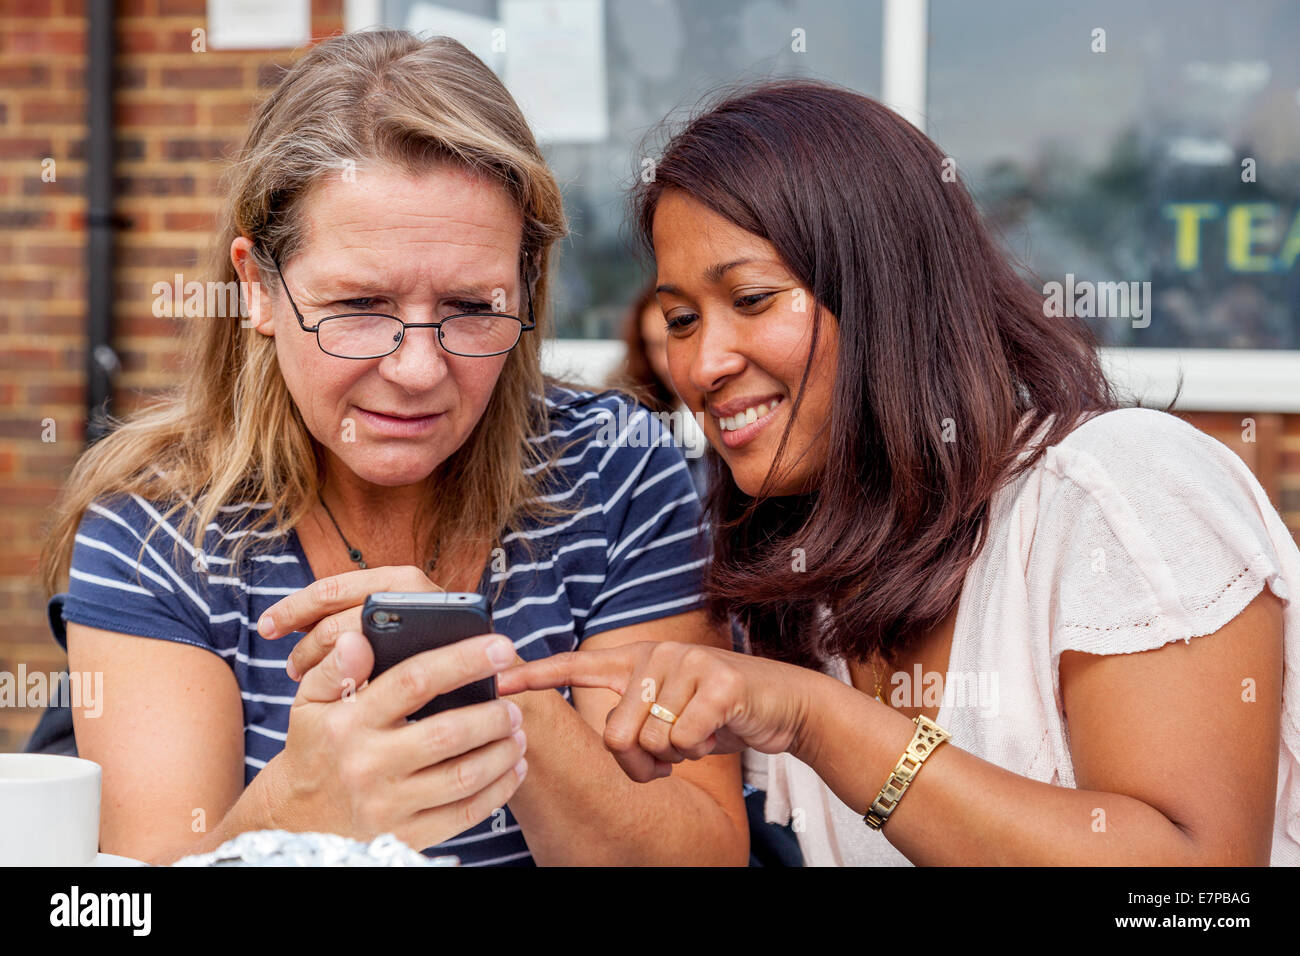 Two Women Looking At Photographs On A Smartphone, Hartfield Village Fete, Sussex, England Stock Photo